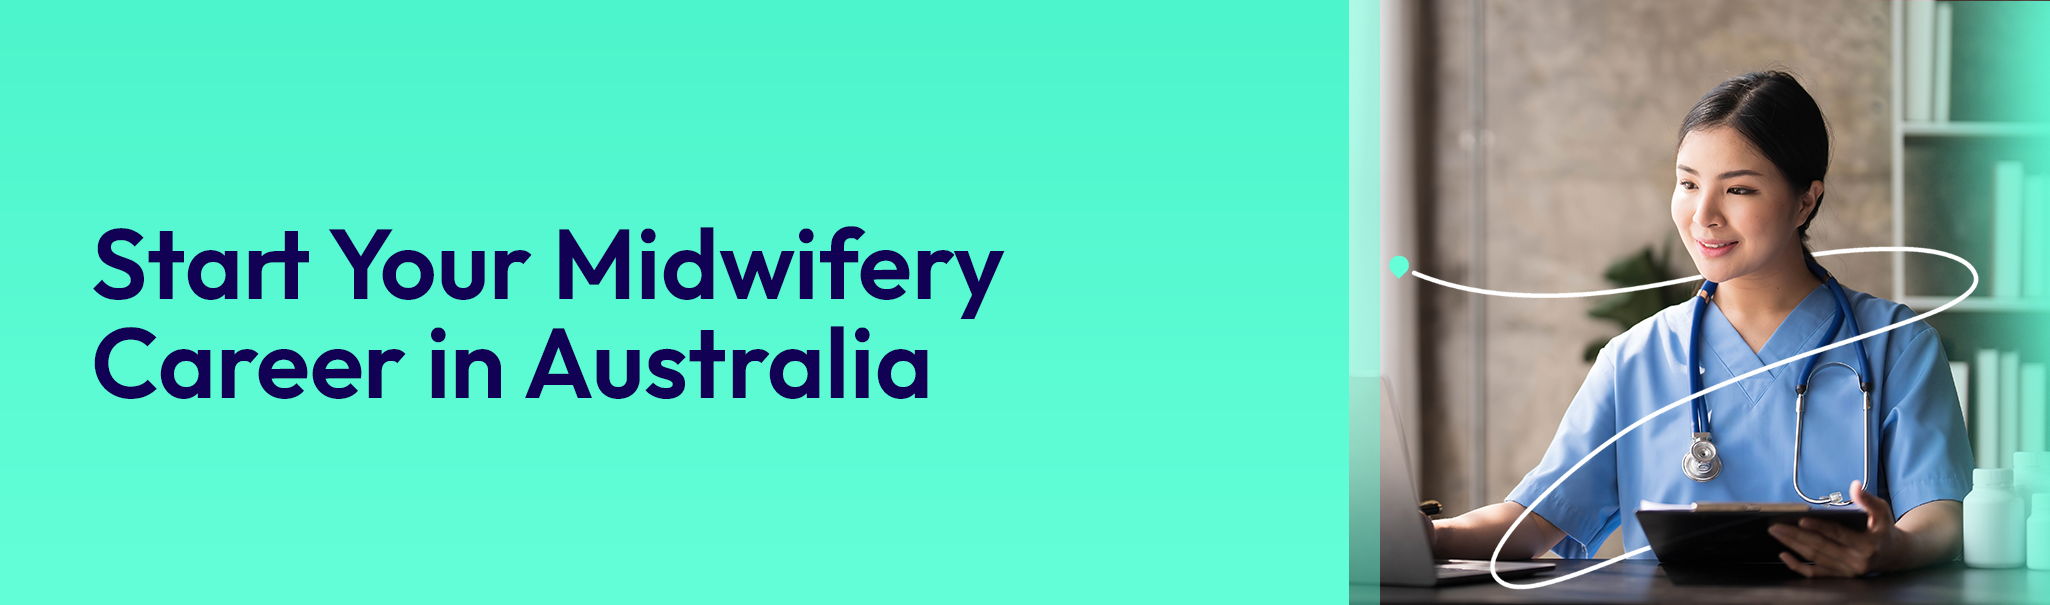 midwife How to Become A Midwife In Australia | FAQ'S